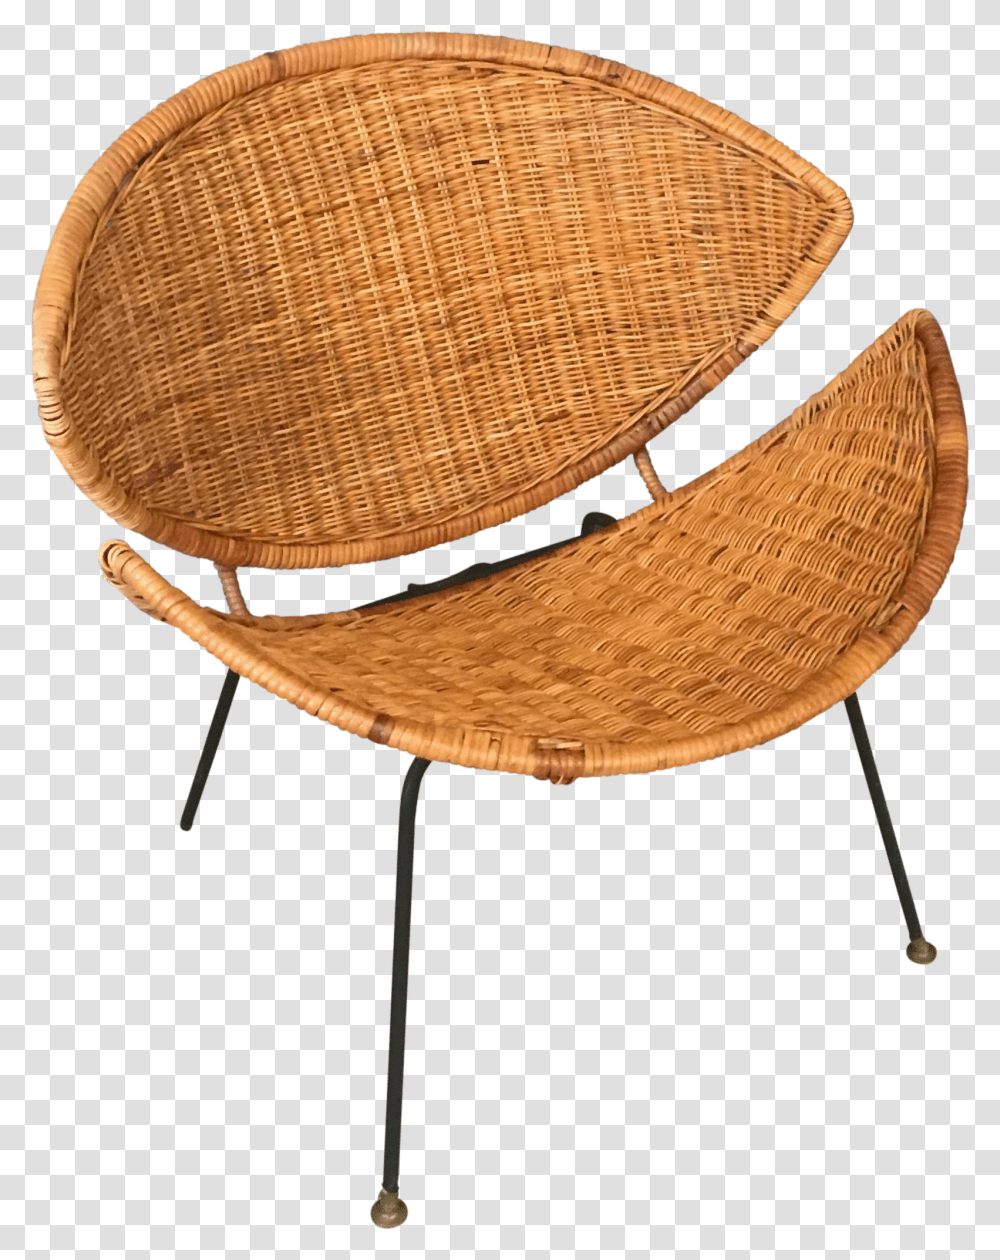 Clam Shell Wicker And Rattan Chair On Chairish Chair, Furniture, Lamp, Plywood, Cradle Transparent Png